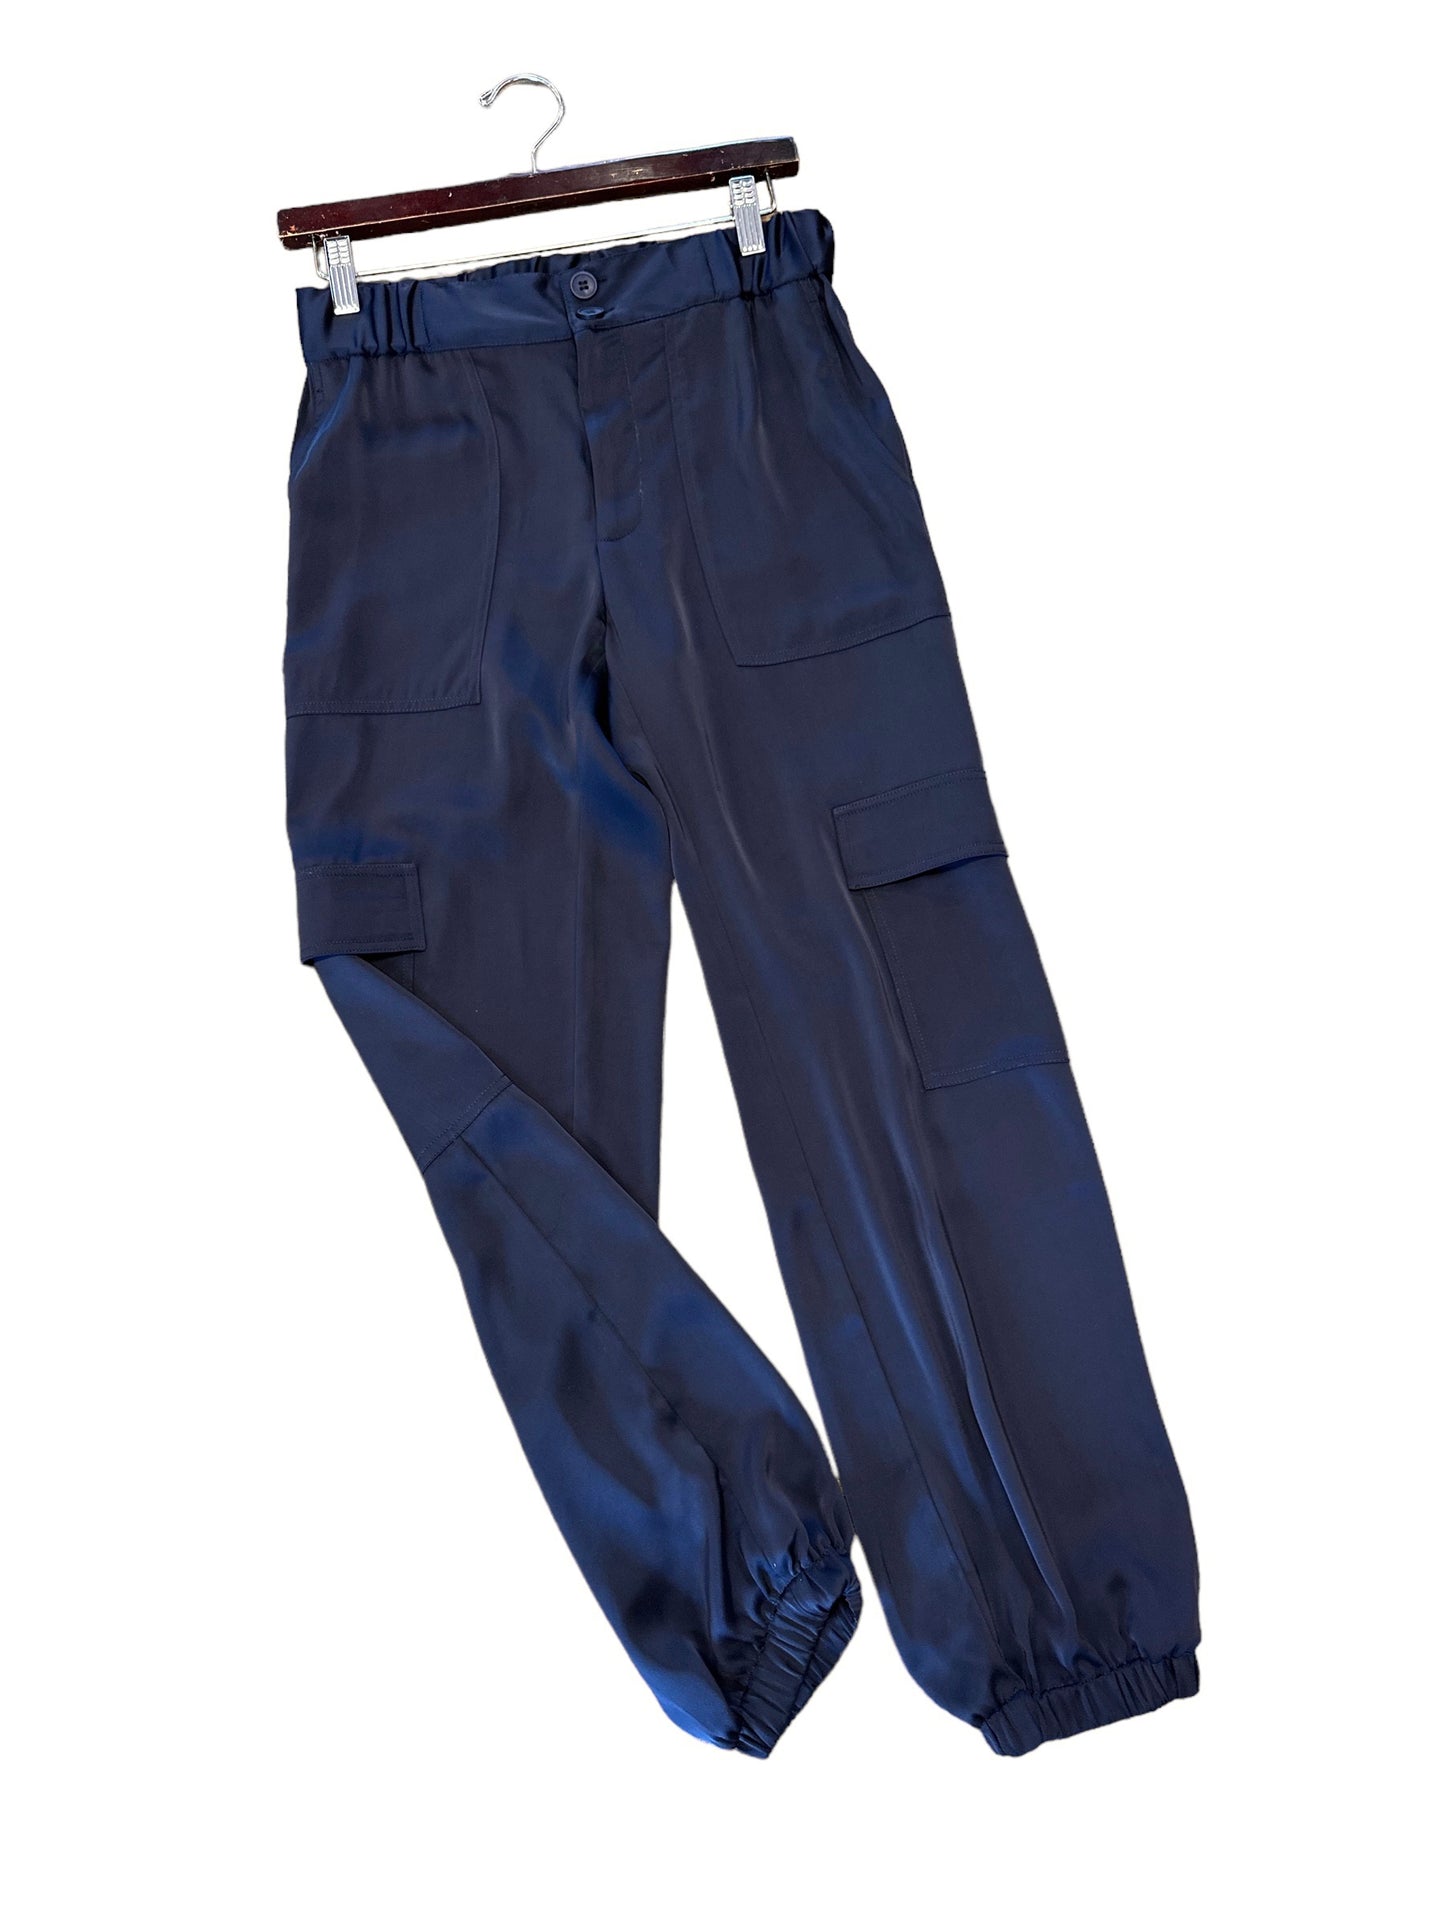 Cargo Jogger Pant in navy by 209